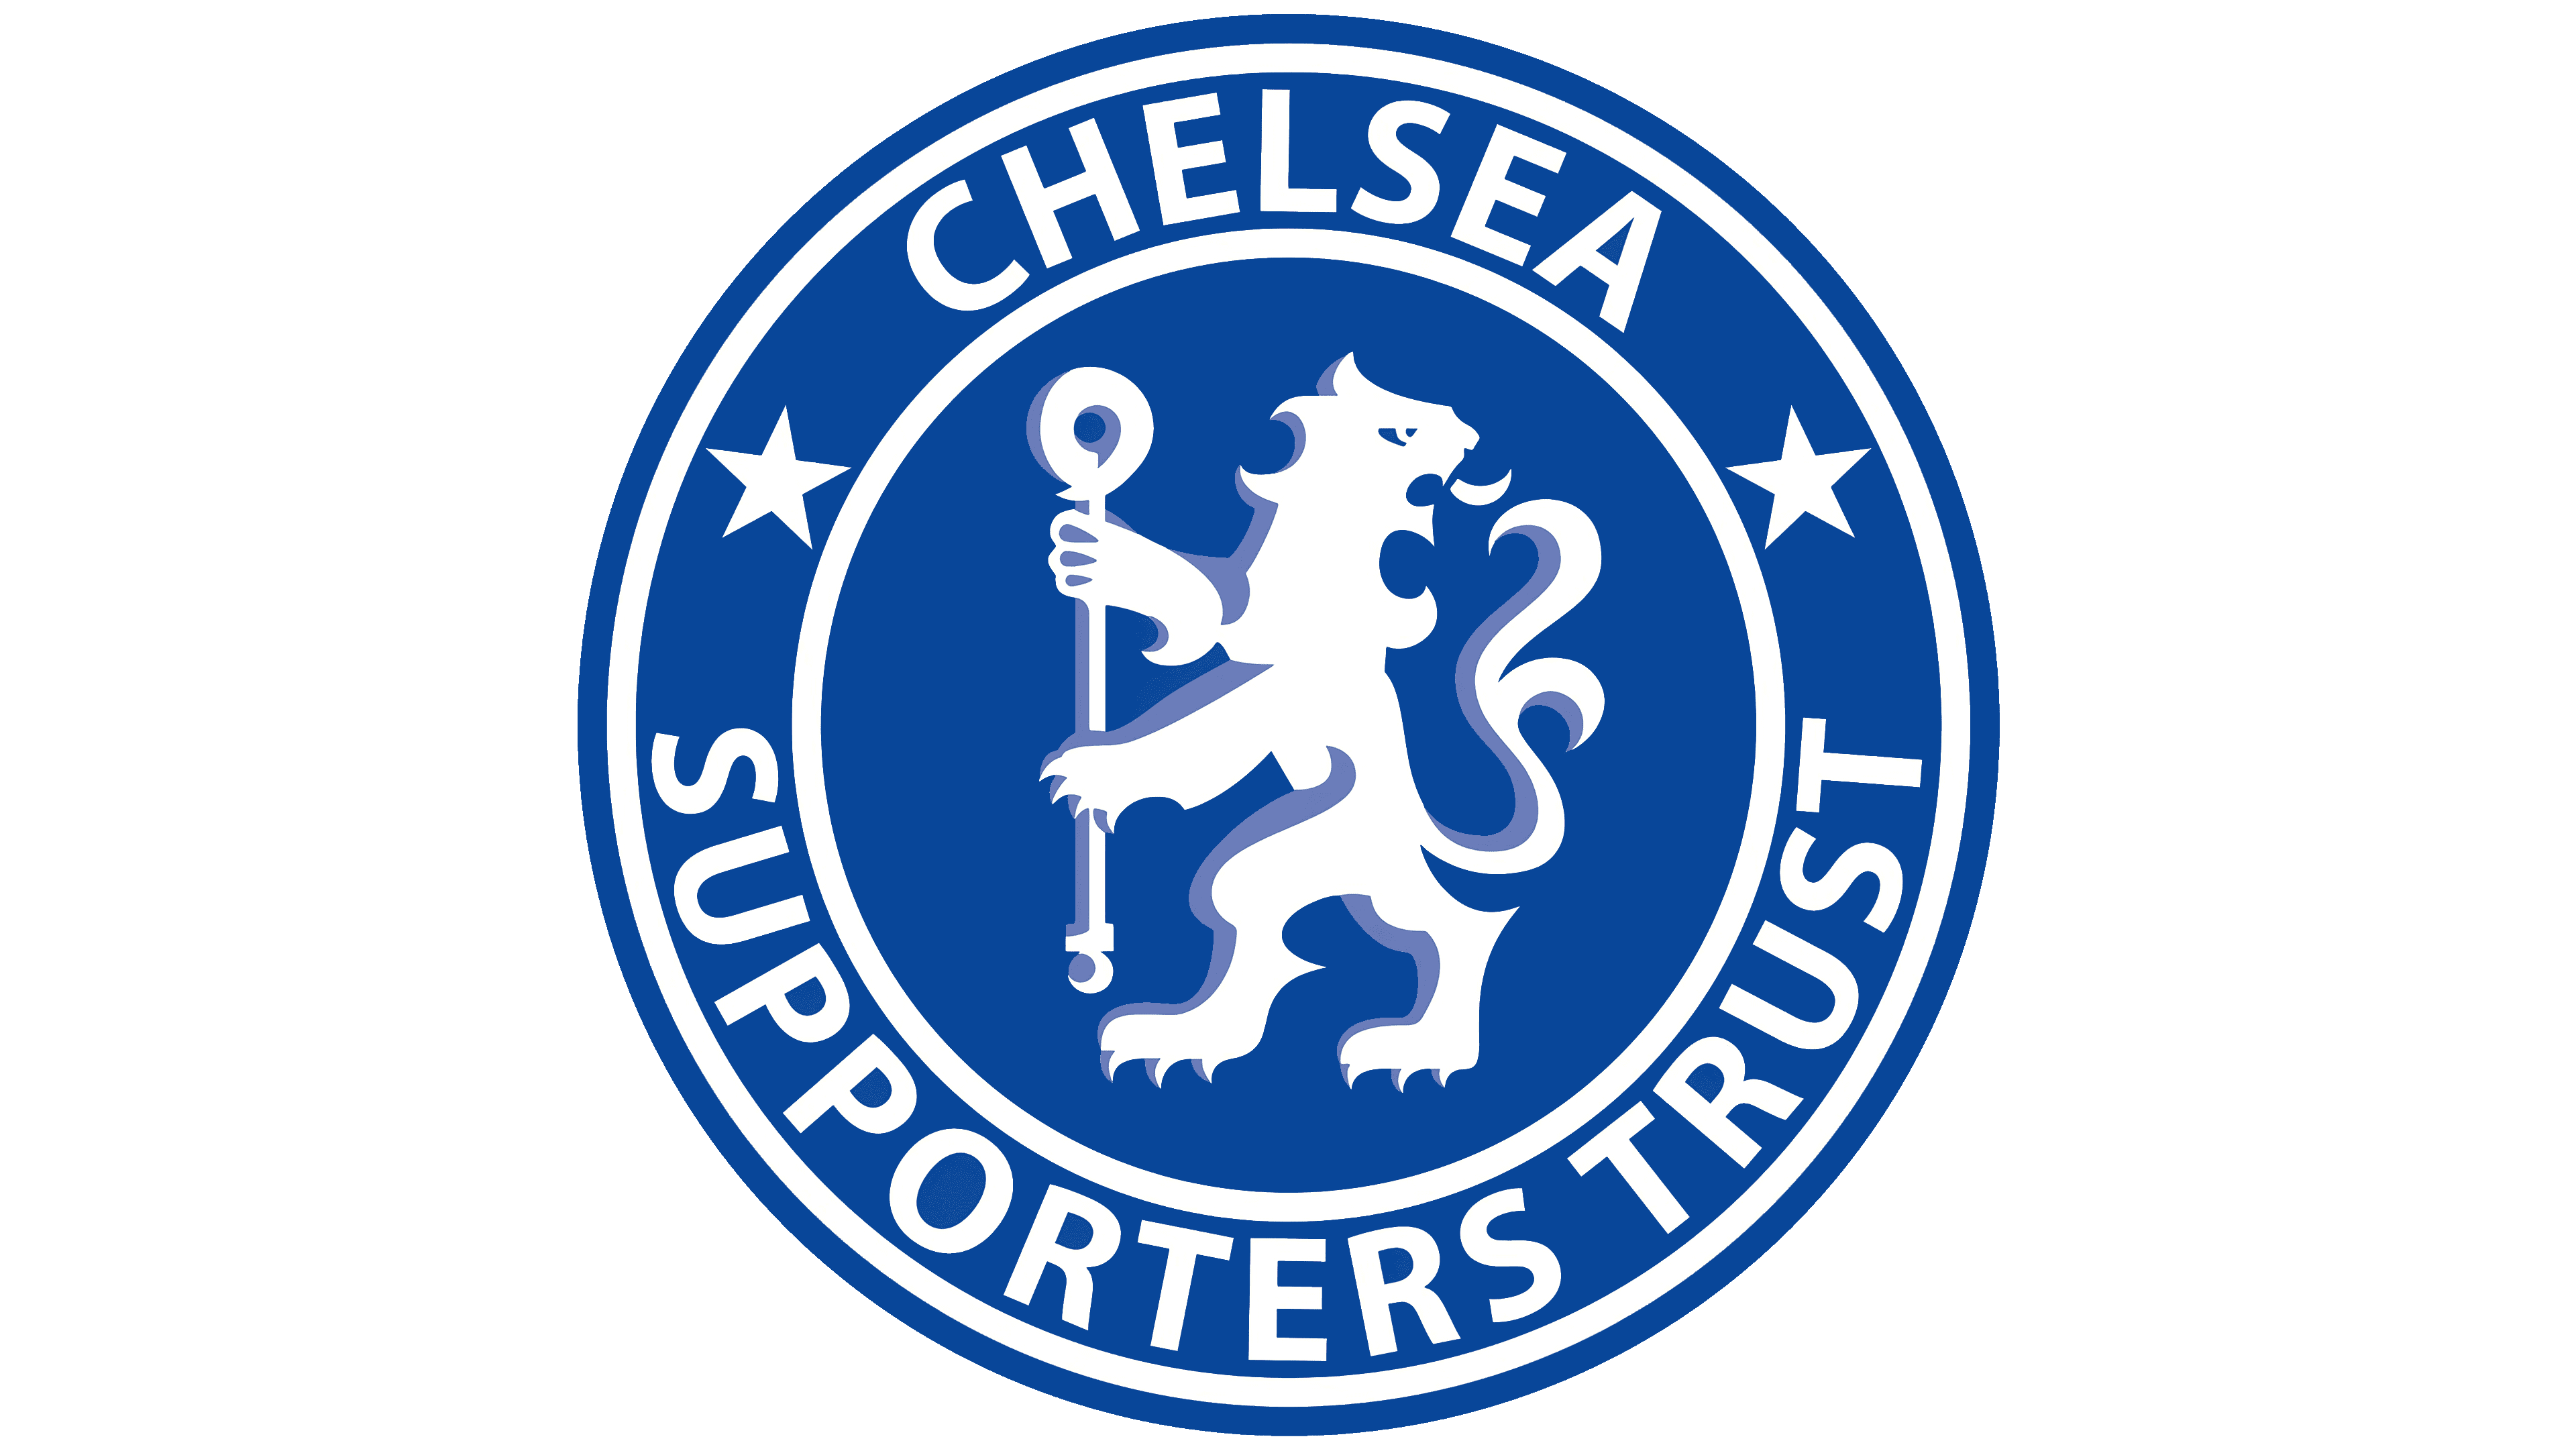 Chelsea Logo The Most Famous Brands And Company Logos In The World